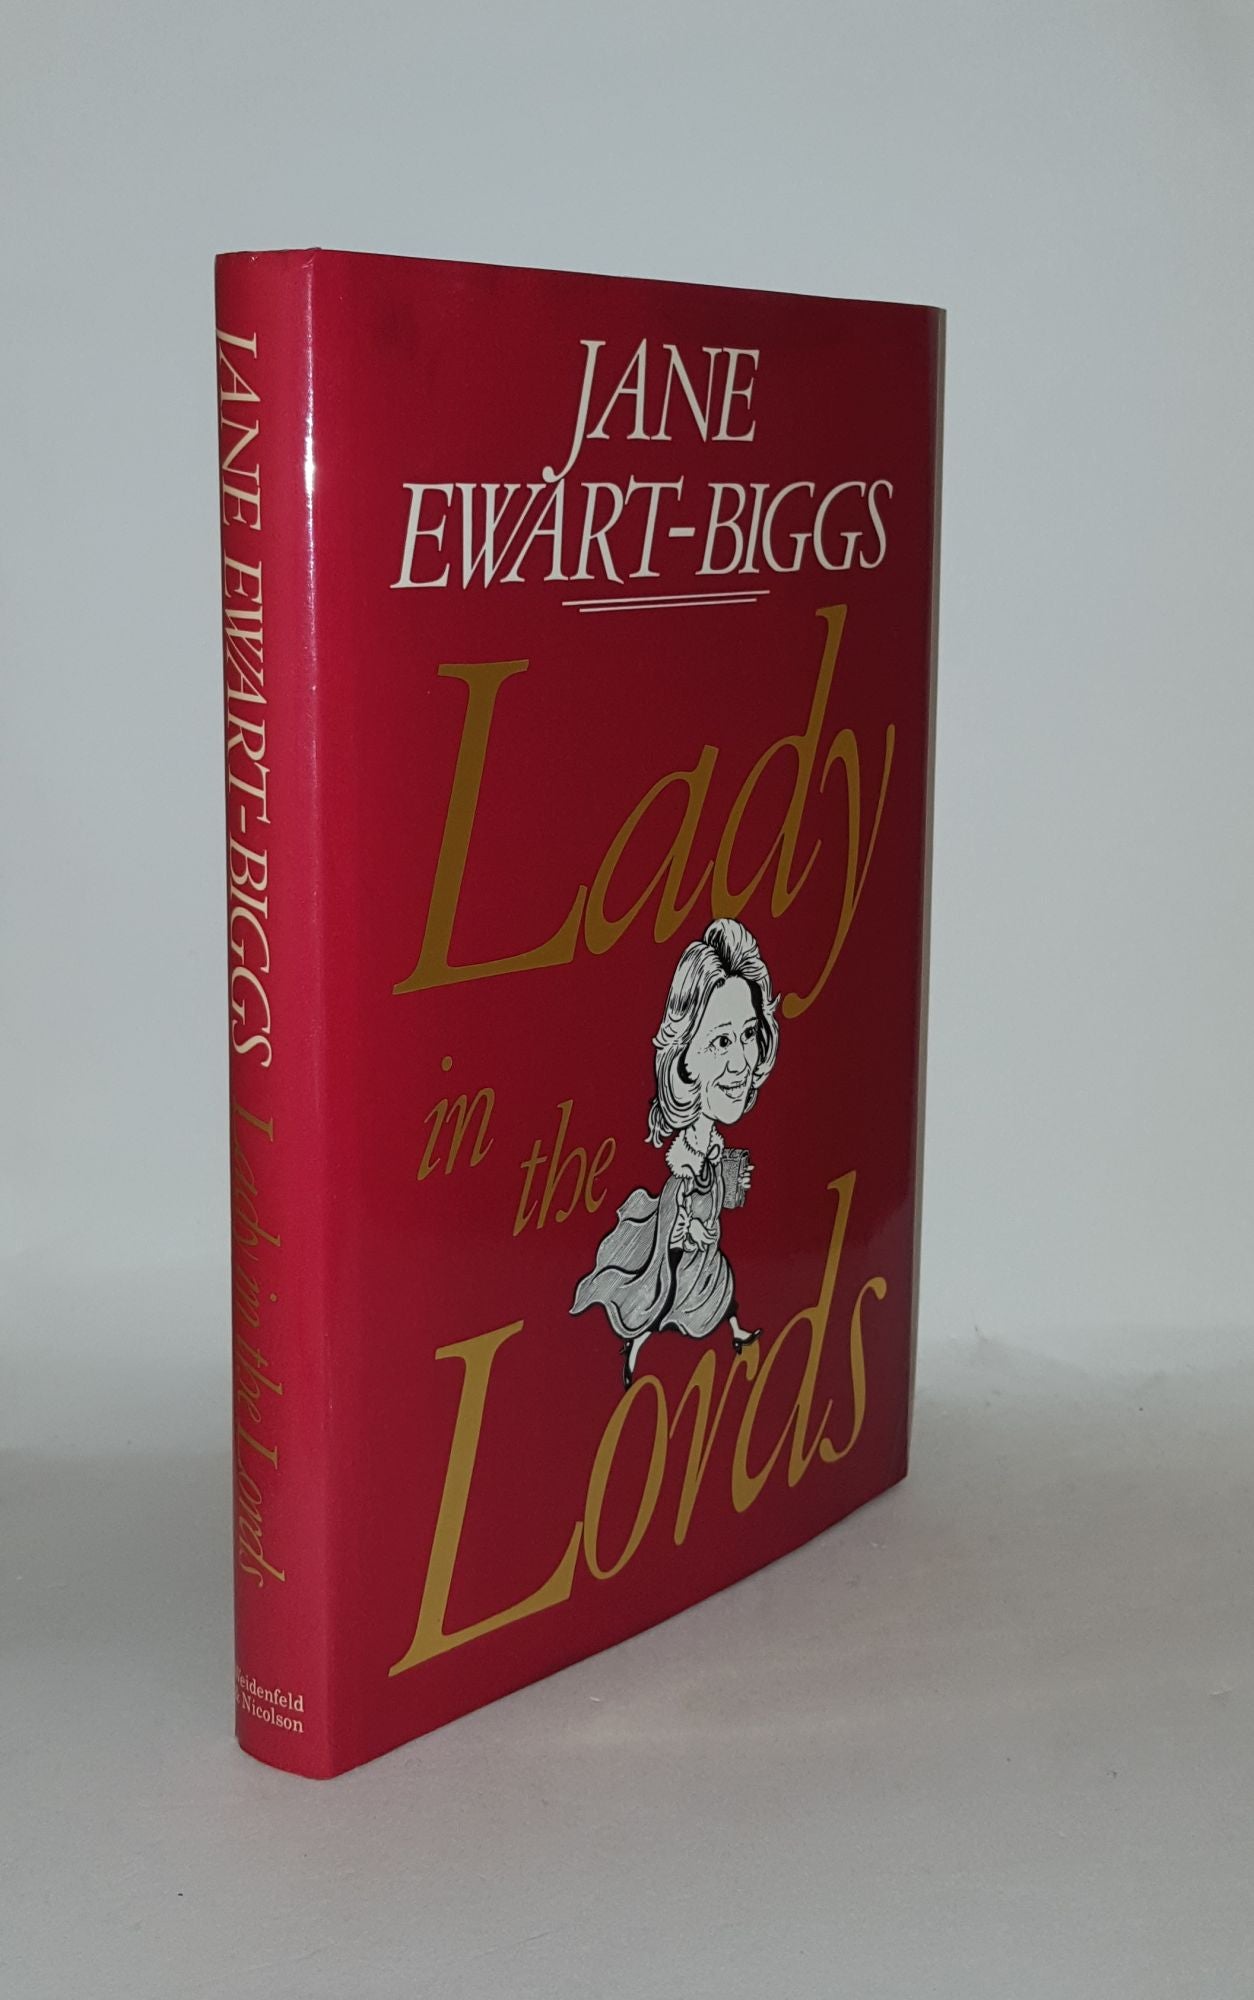 EWART-BIGGS Jane - Lady in the Lords